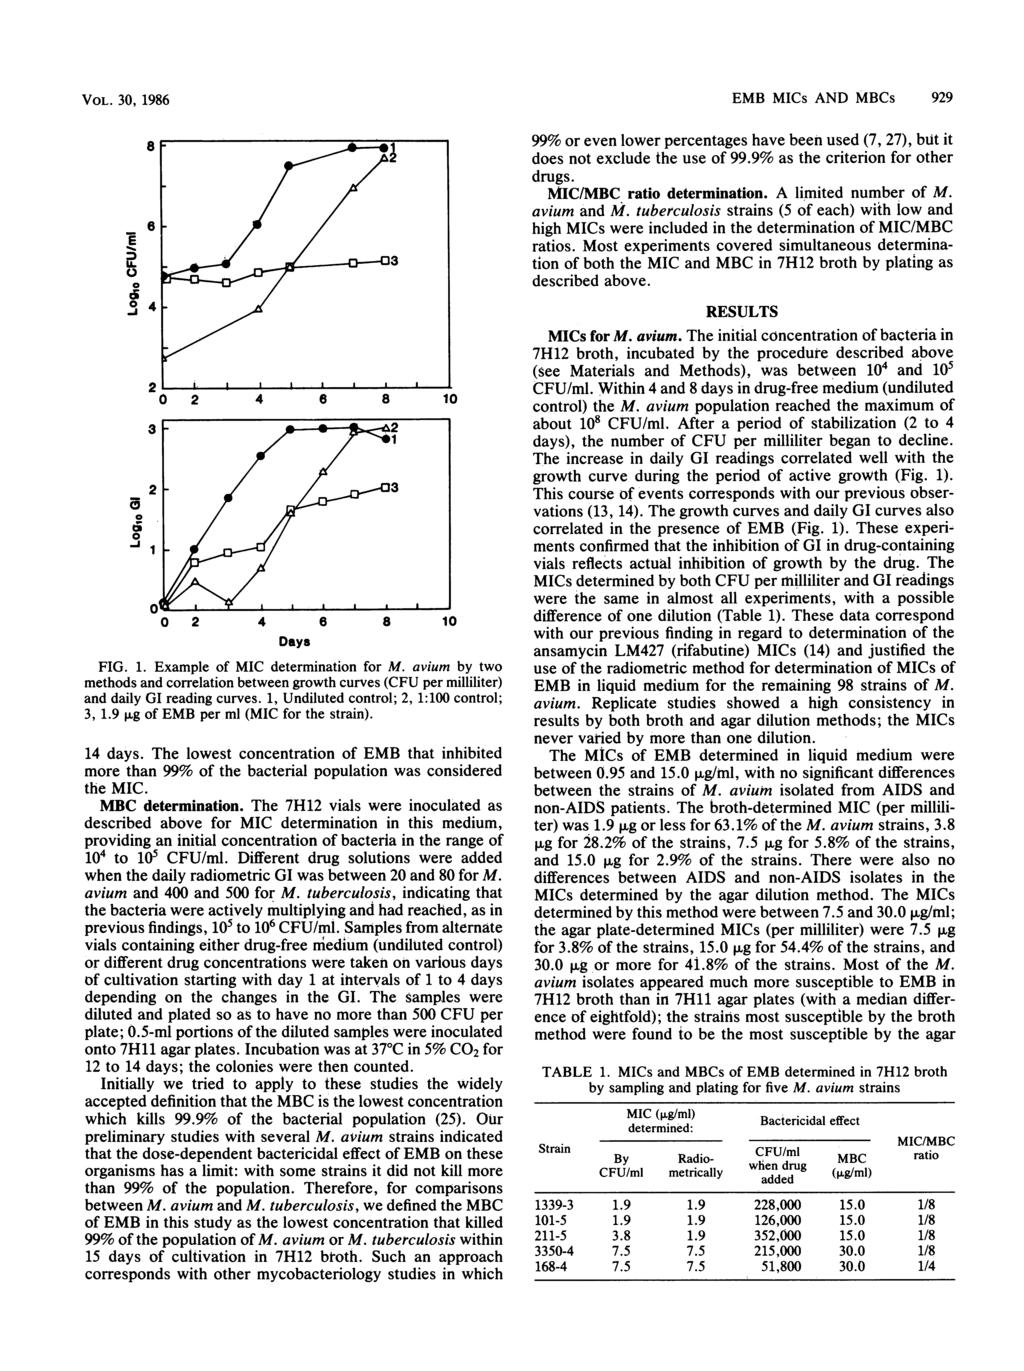 VOL. 3, 1986 E U, 4 > 2 2 4 8 1 238 l Days FIG. 1. Example of MIC determination for M. avium by two methods and correlation between growth curves (CFU per milliliter) and daily GI reading curves.